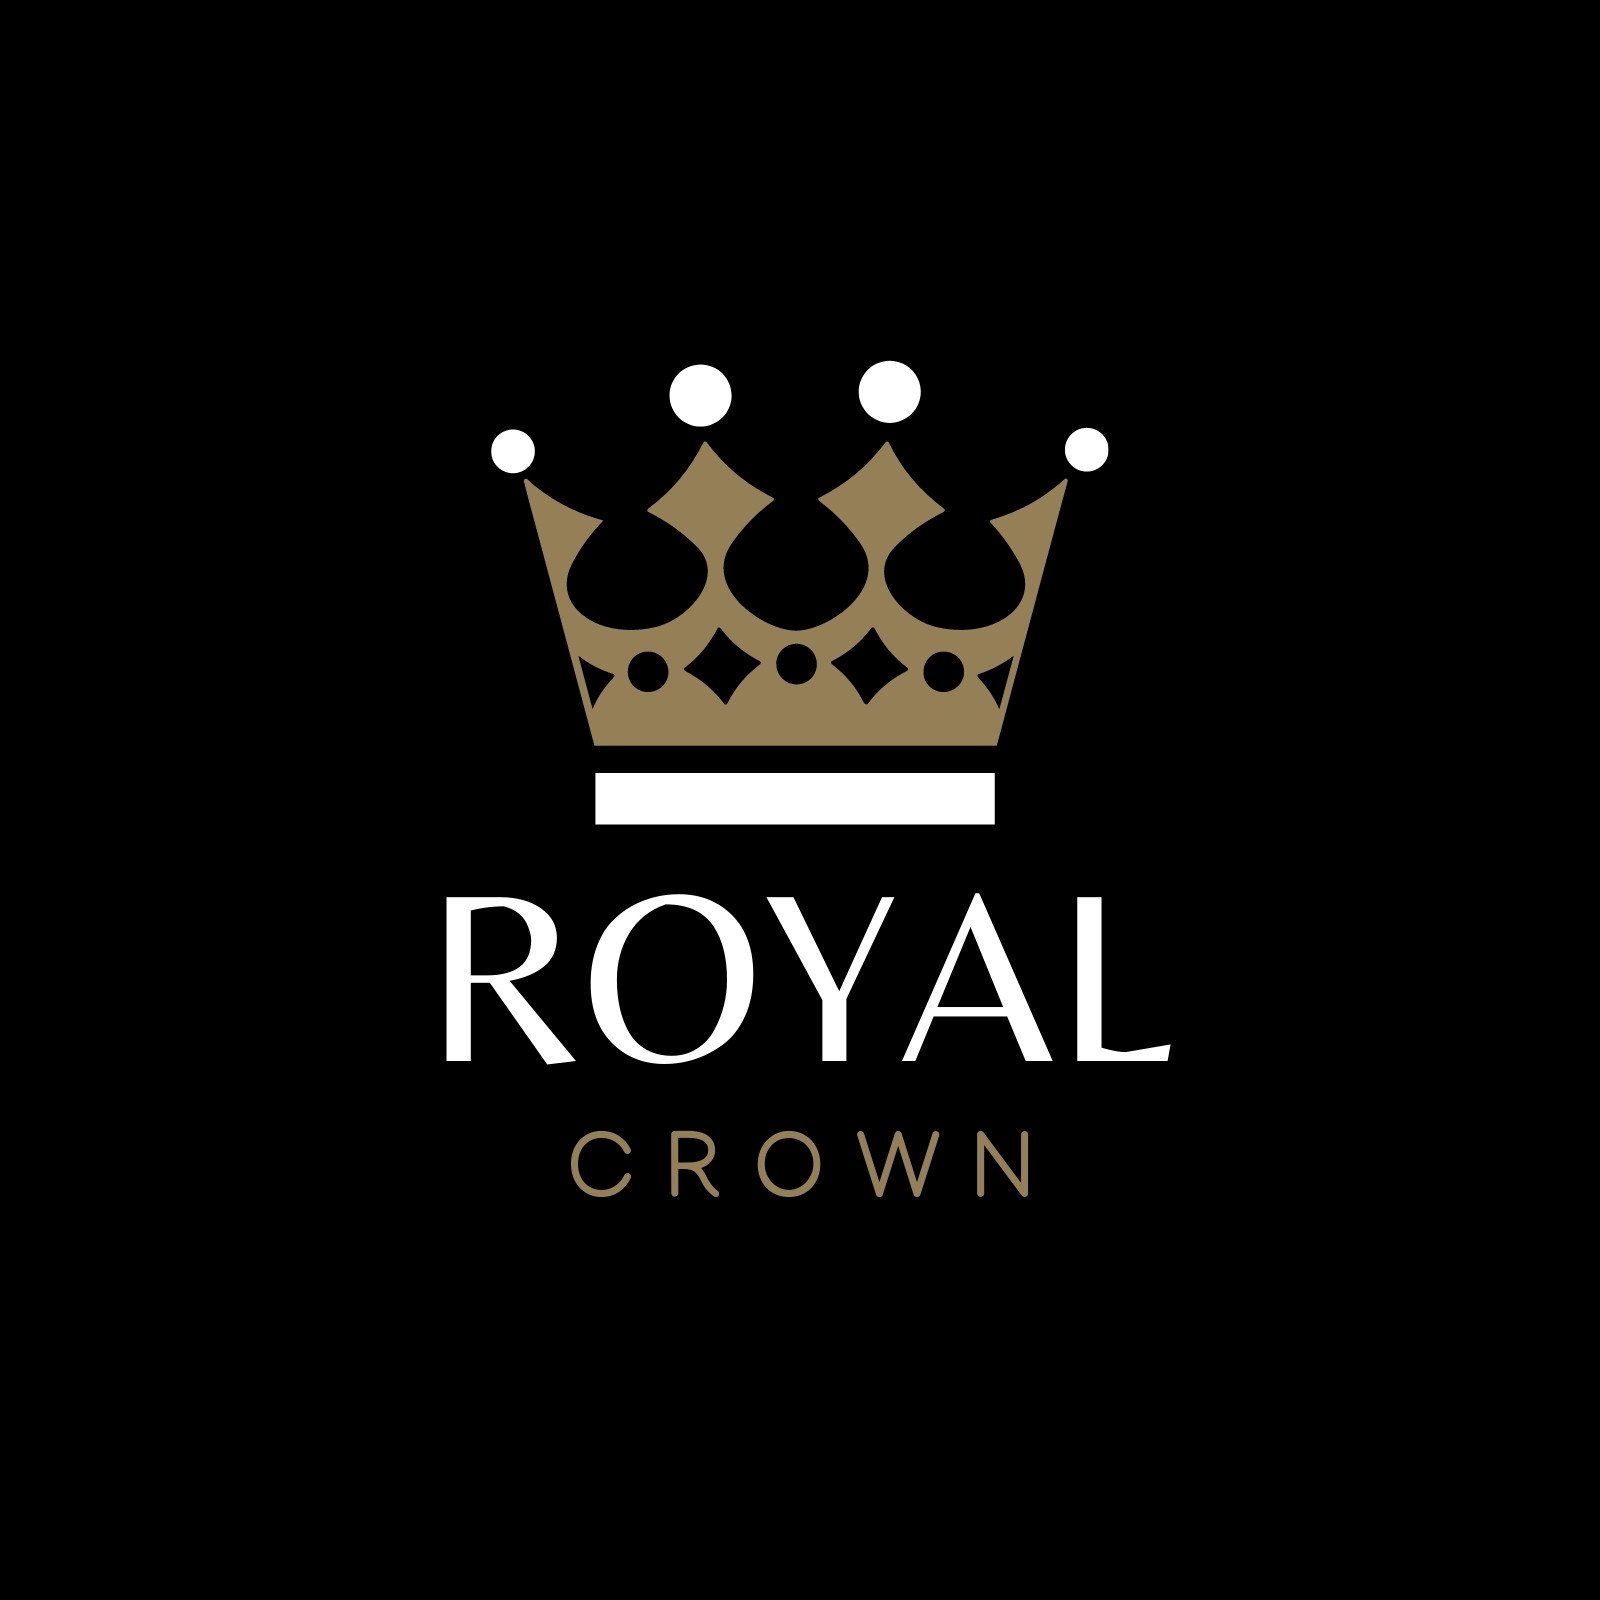 Free and customizable crown templates